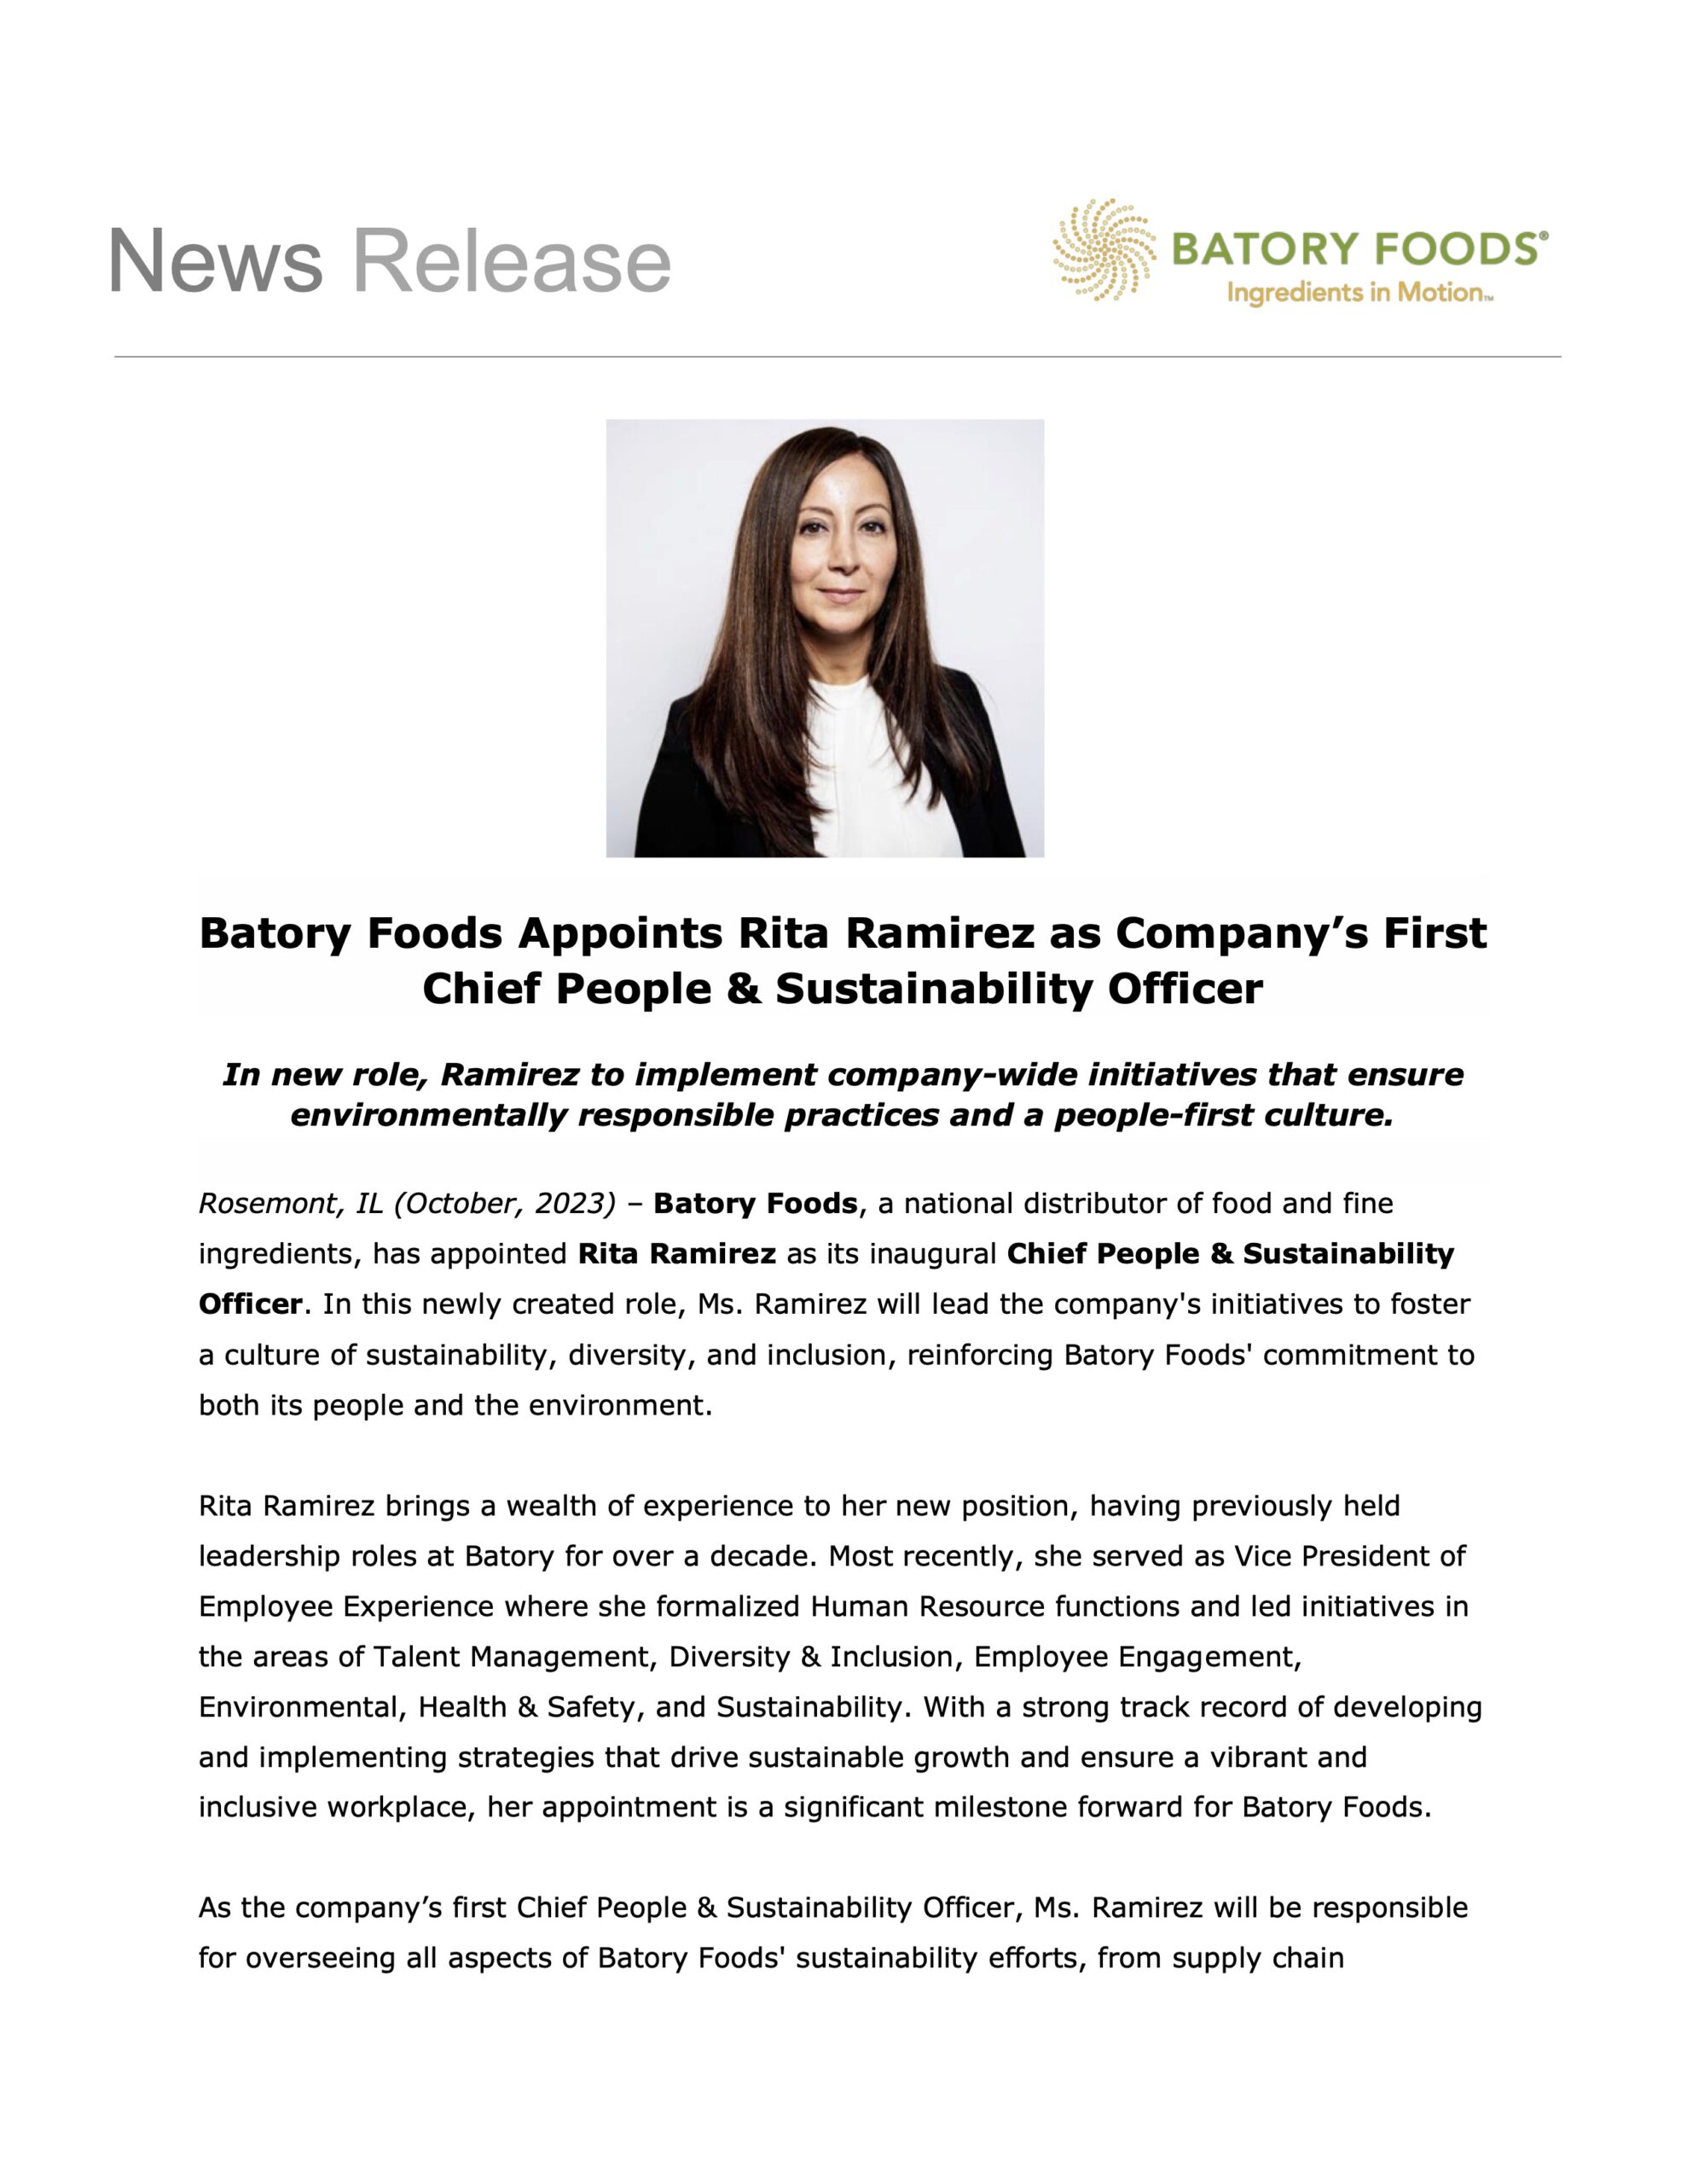 Batory Foods Appoints Rita Ramirez as Chief People & Sustainability Officer